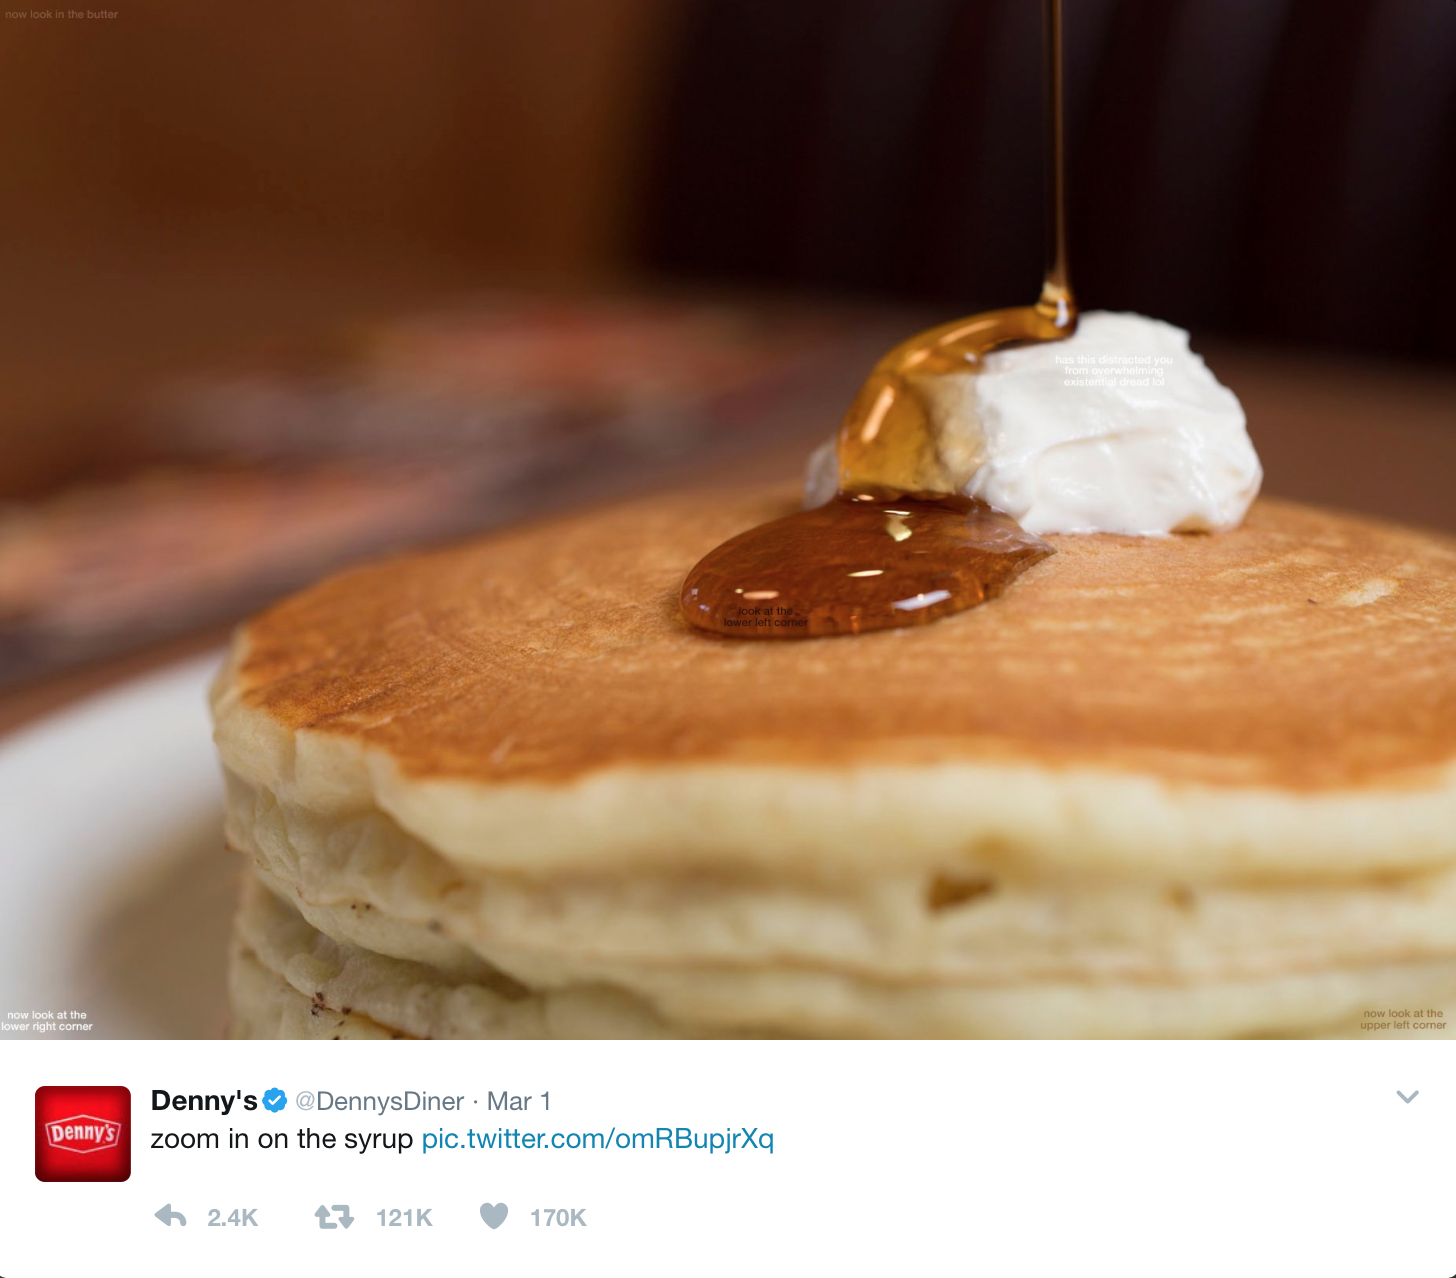 a good example of audience engagement - Dennys Tweet